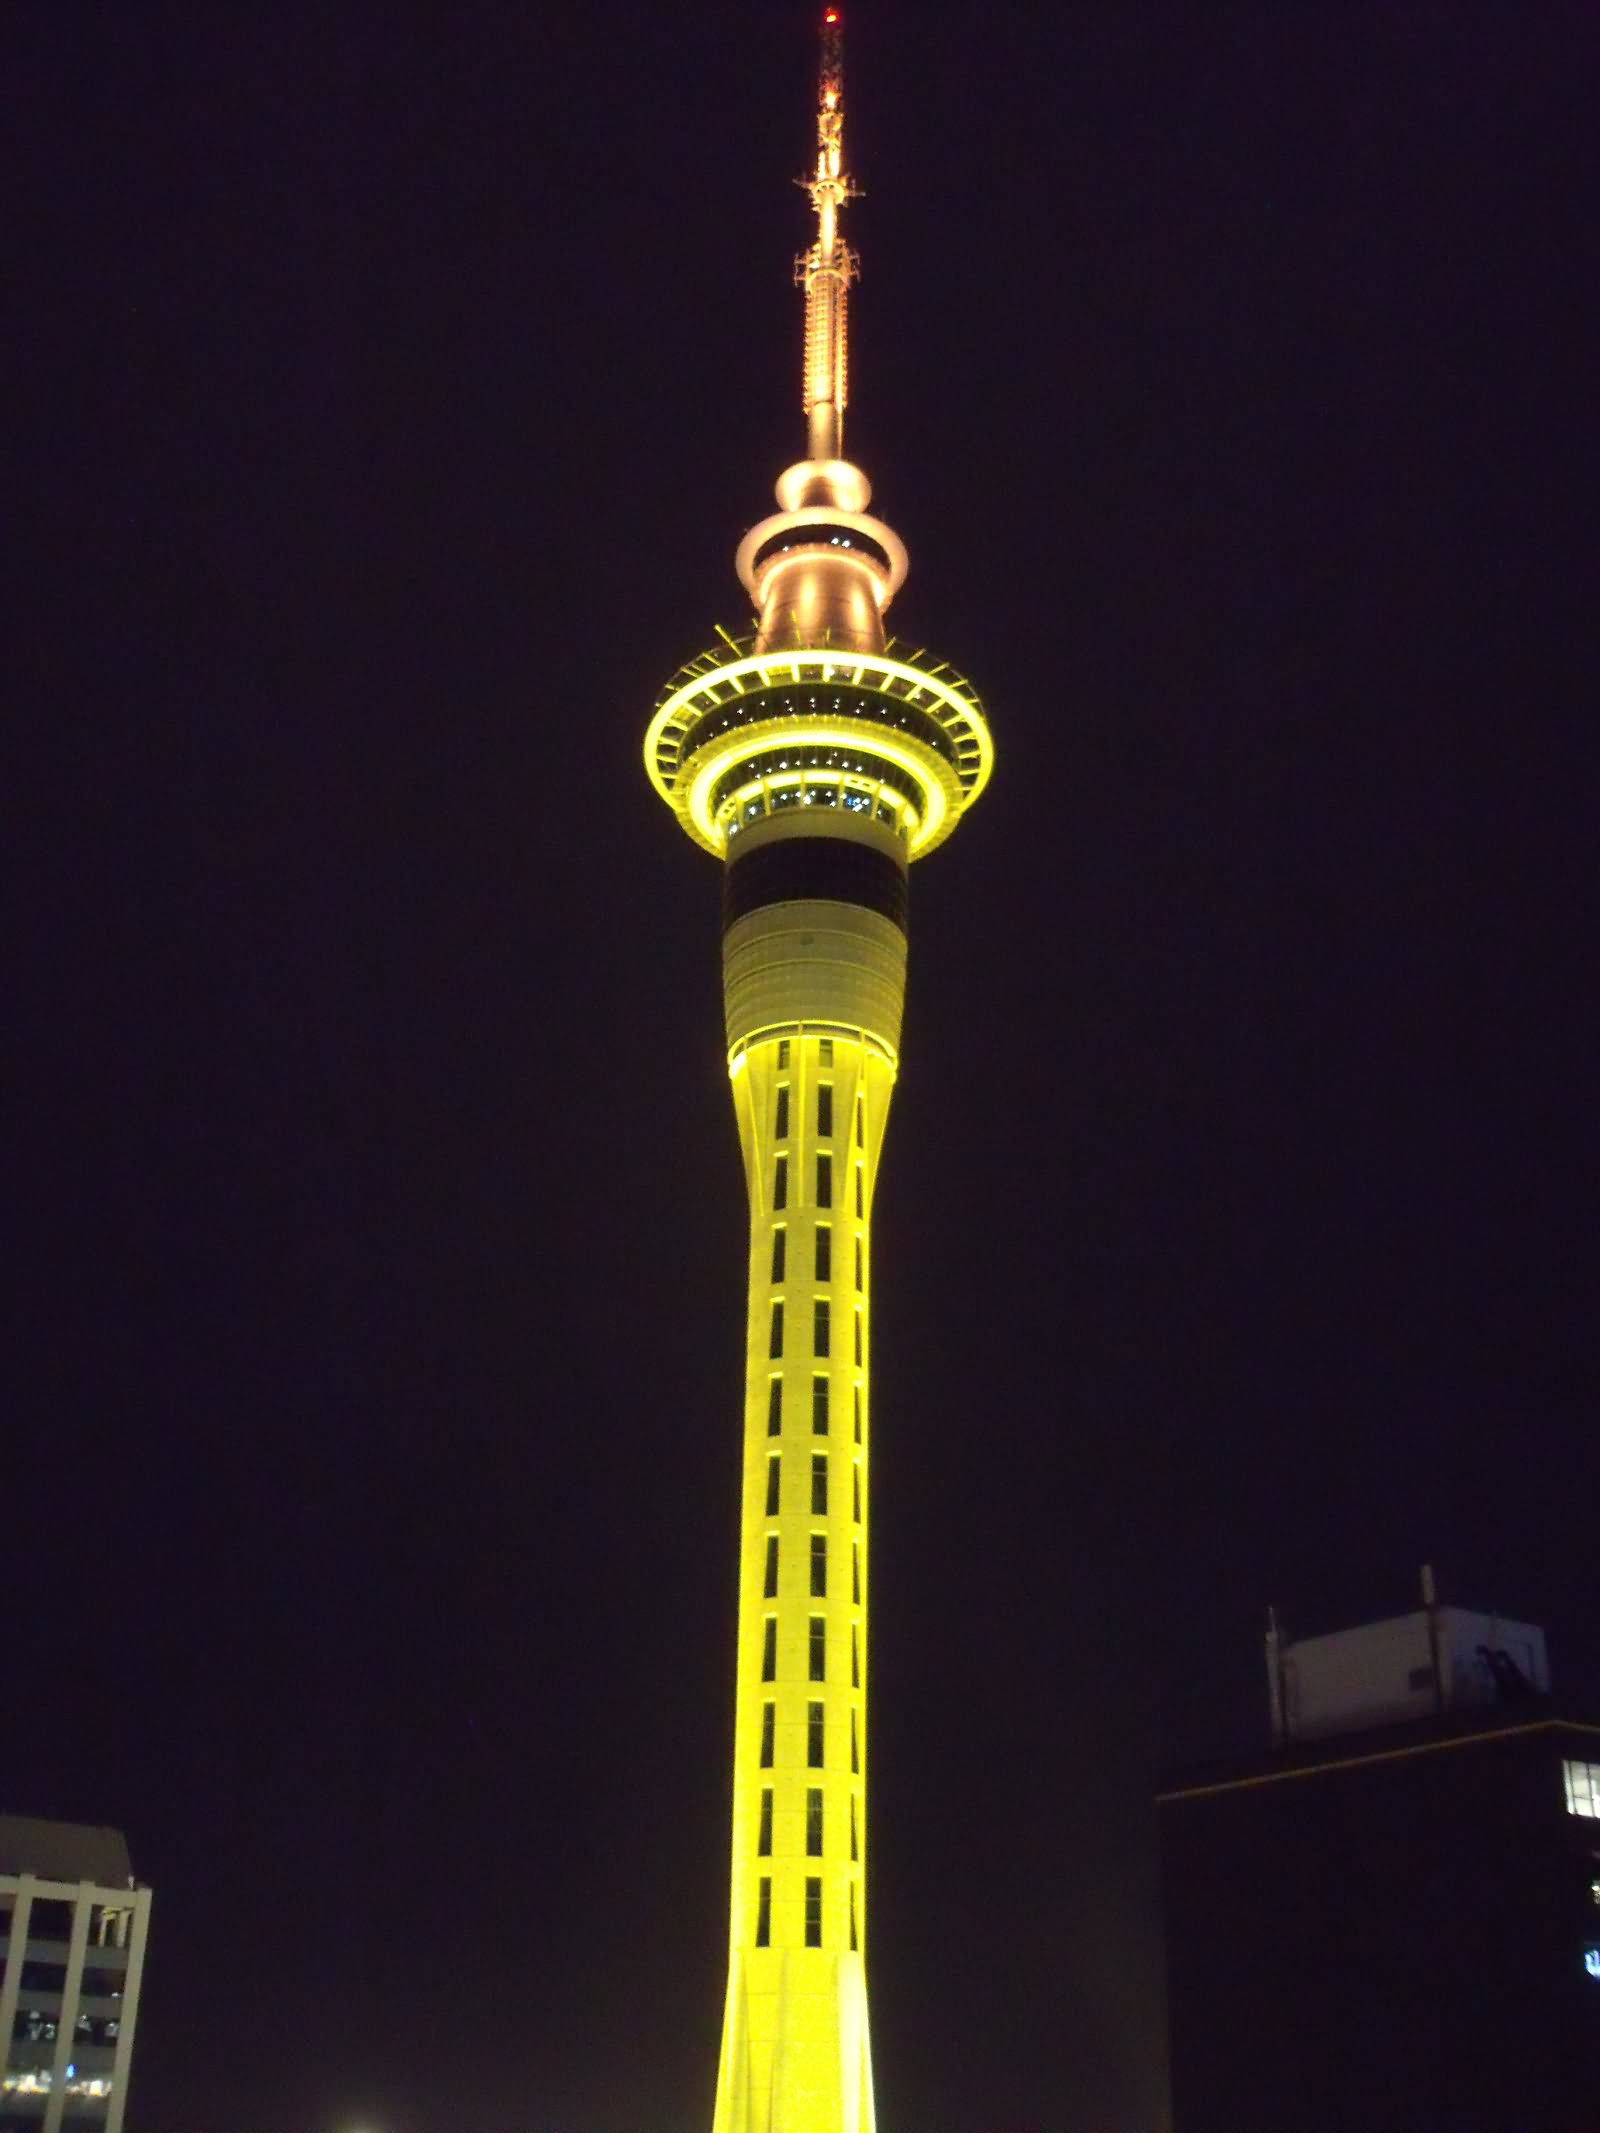 Yellow Lights On The Sky Tower At Night